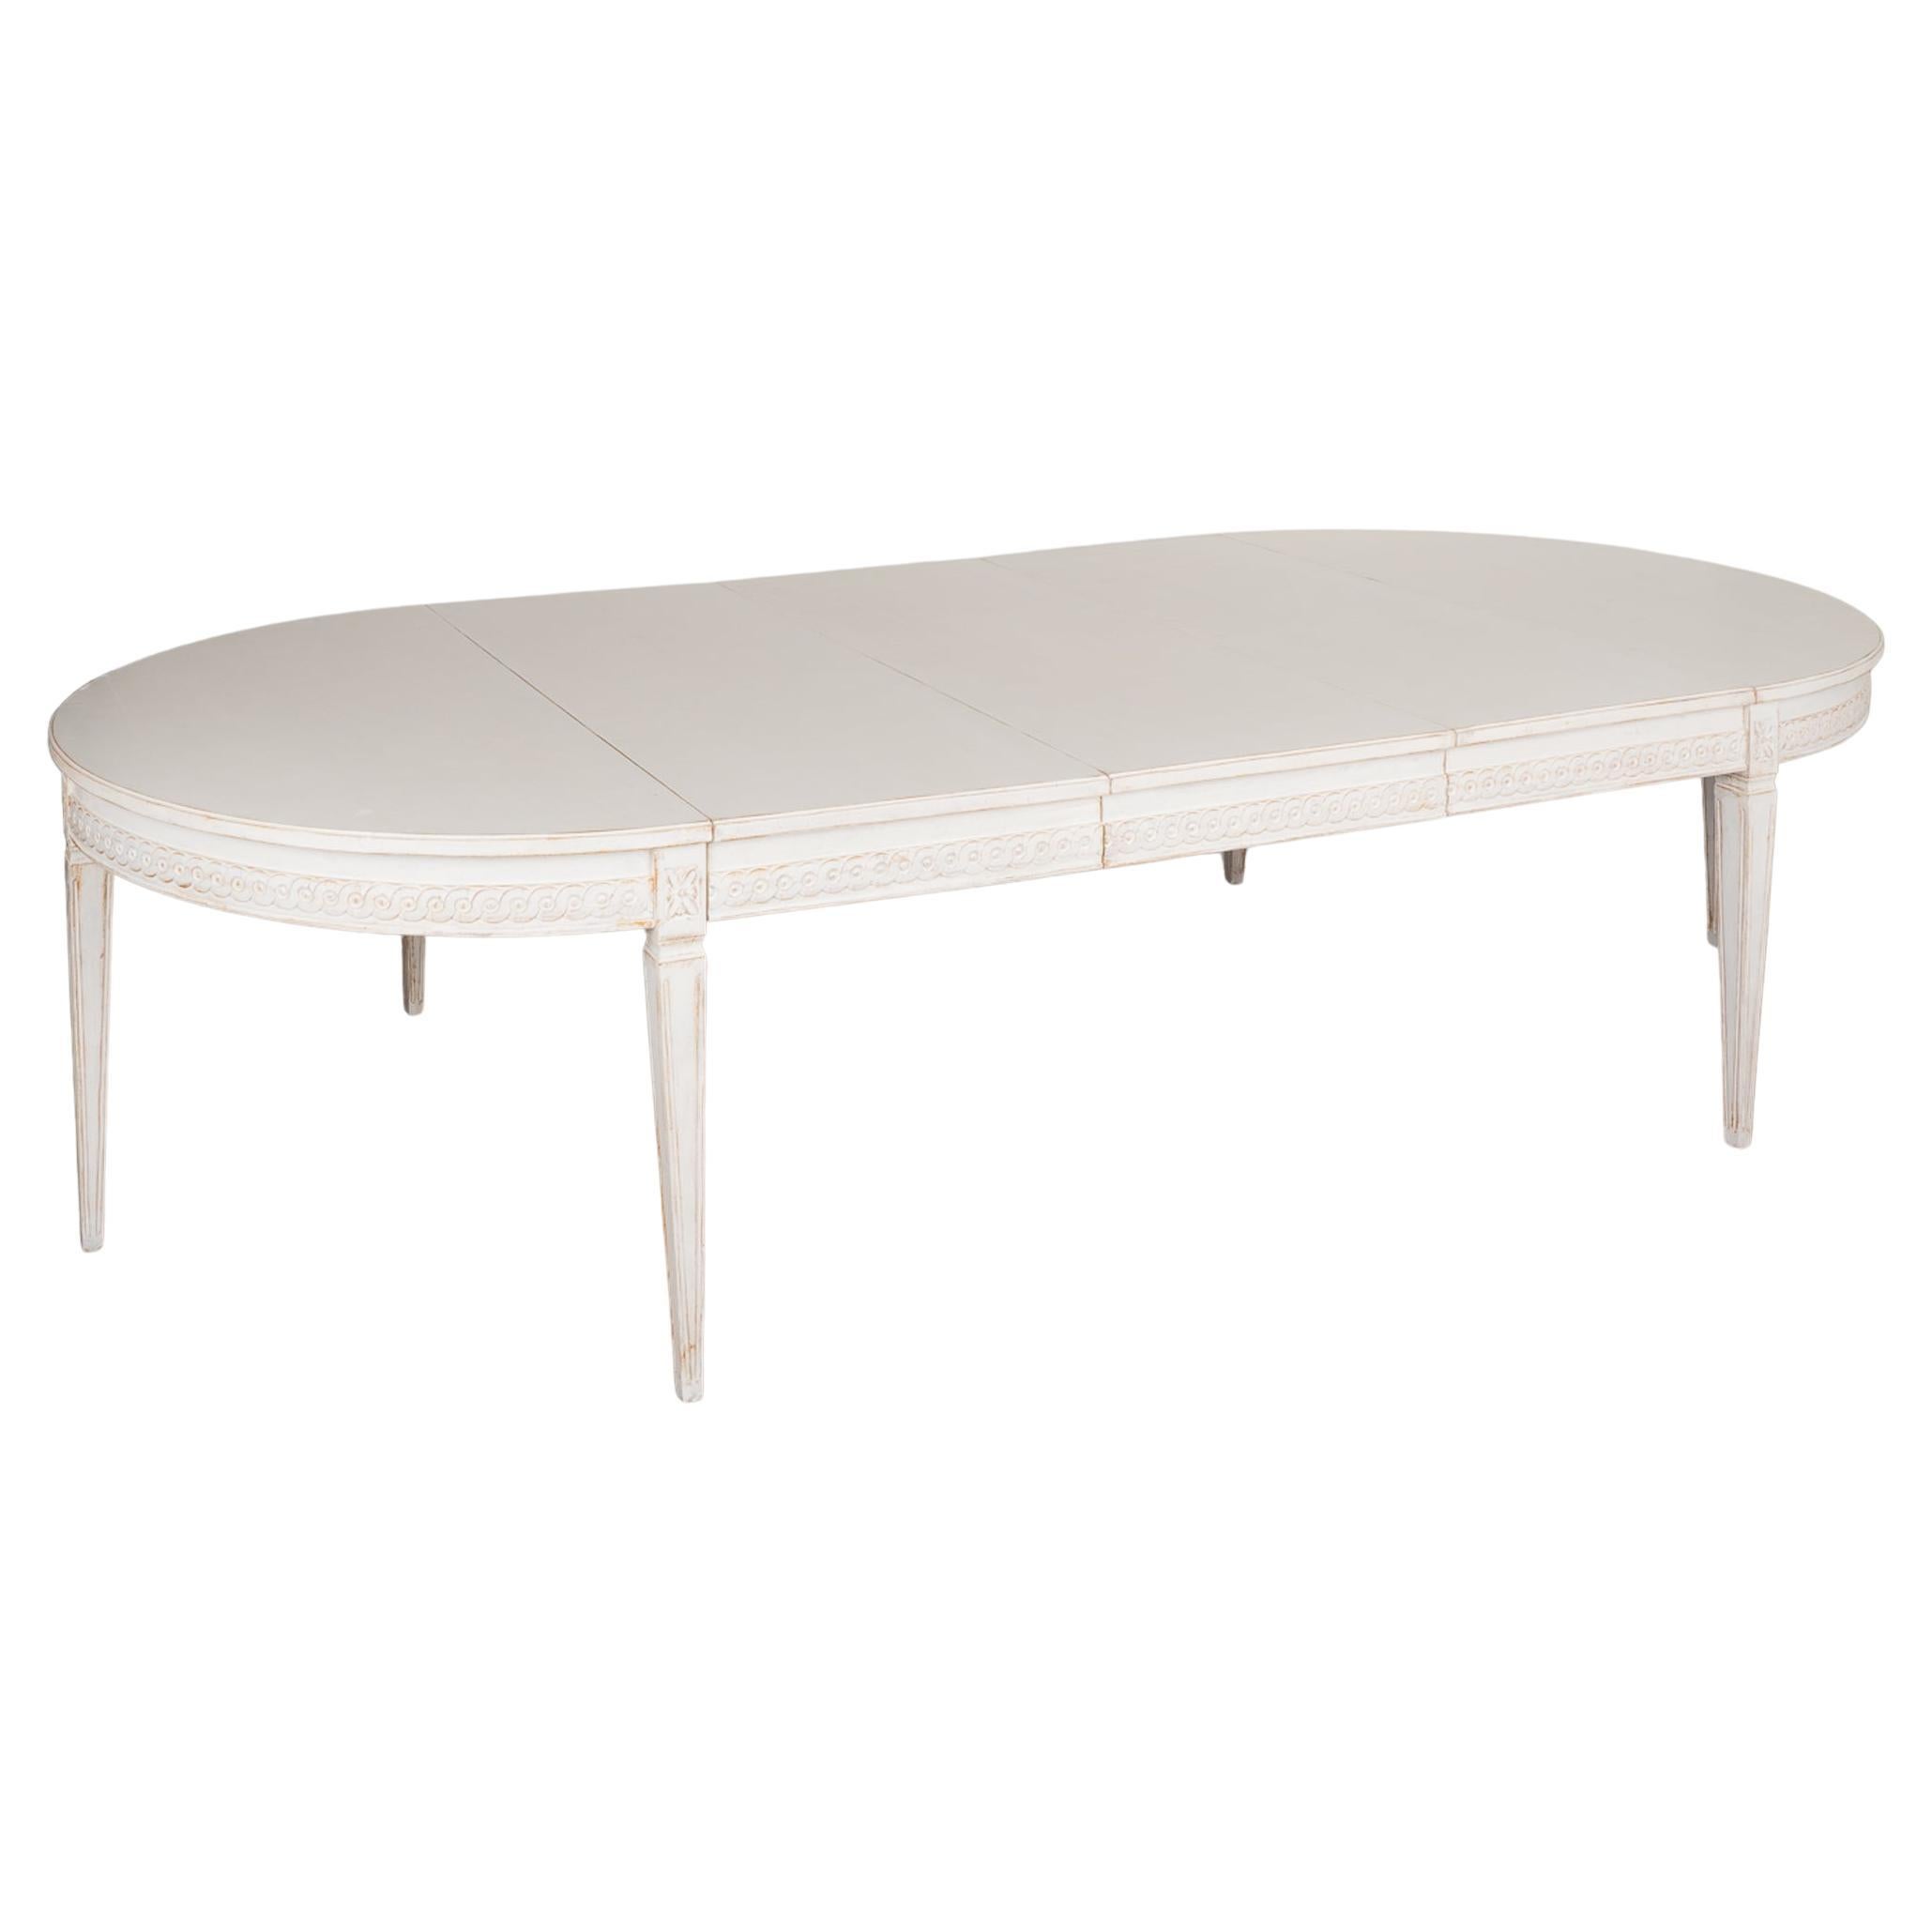 White Oval Dining Table With Three Leaves, Sweden circa 1860-80 For Sale